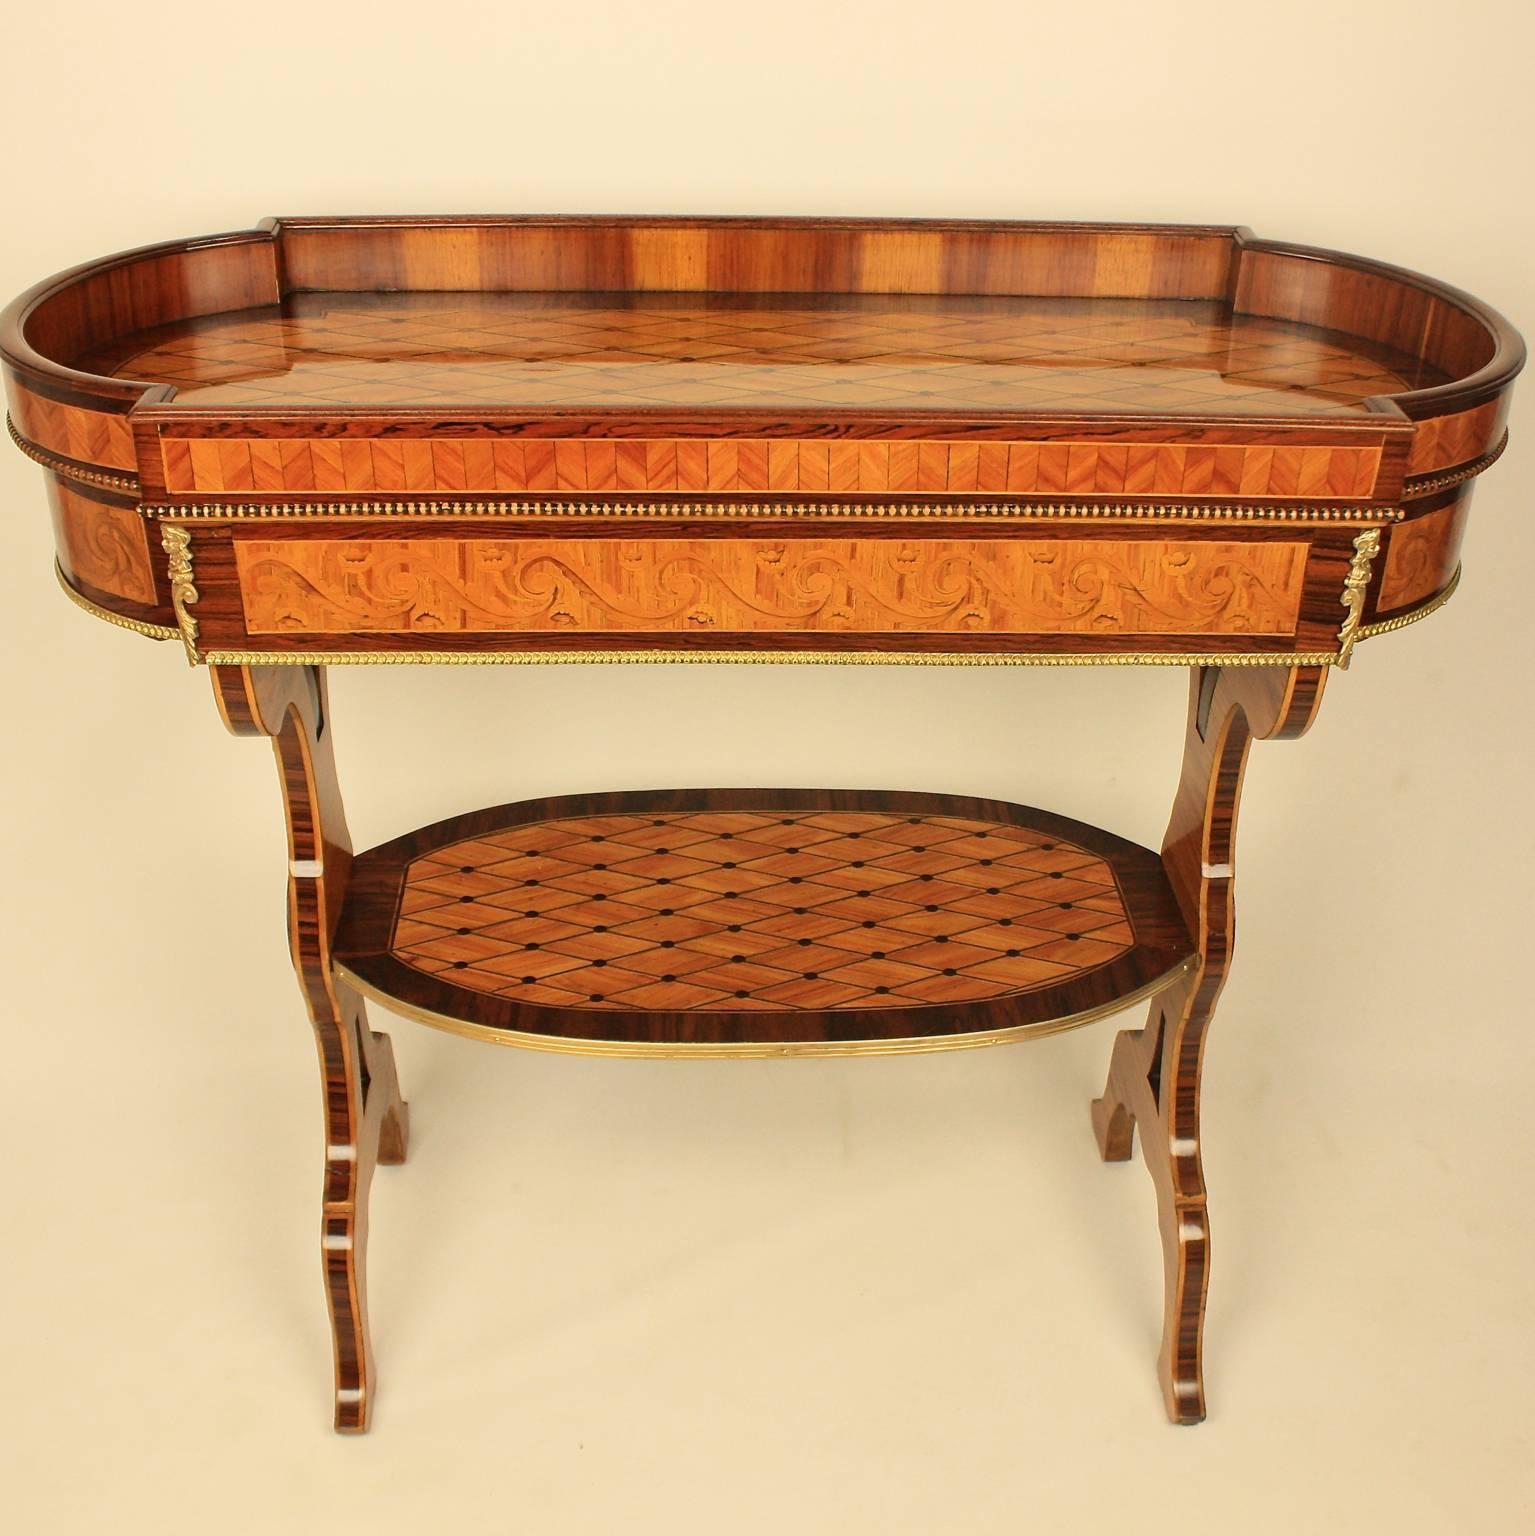 French Louis XVI Style Marquetry Side Table after a Design by J.H. Riesener